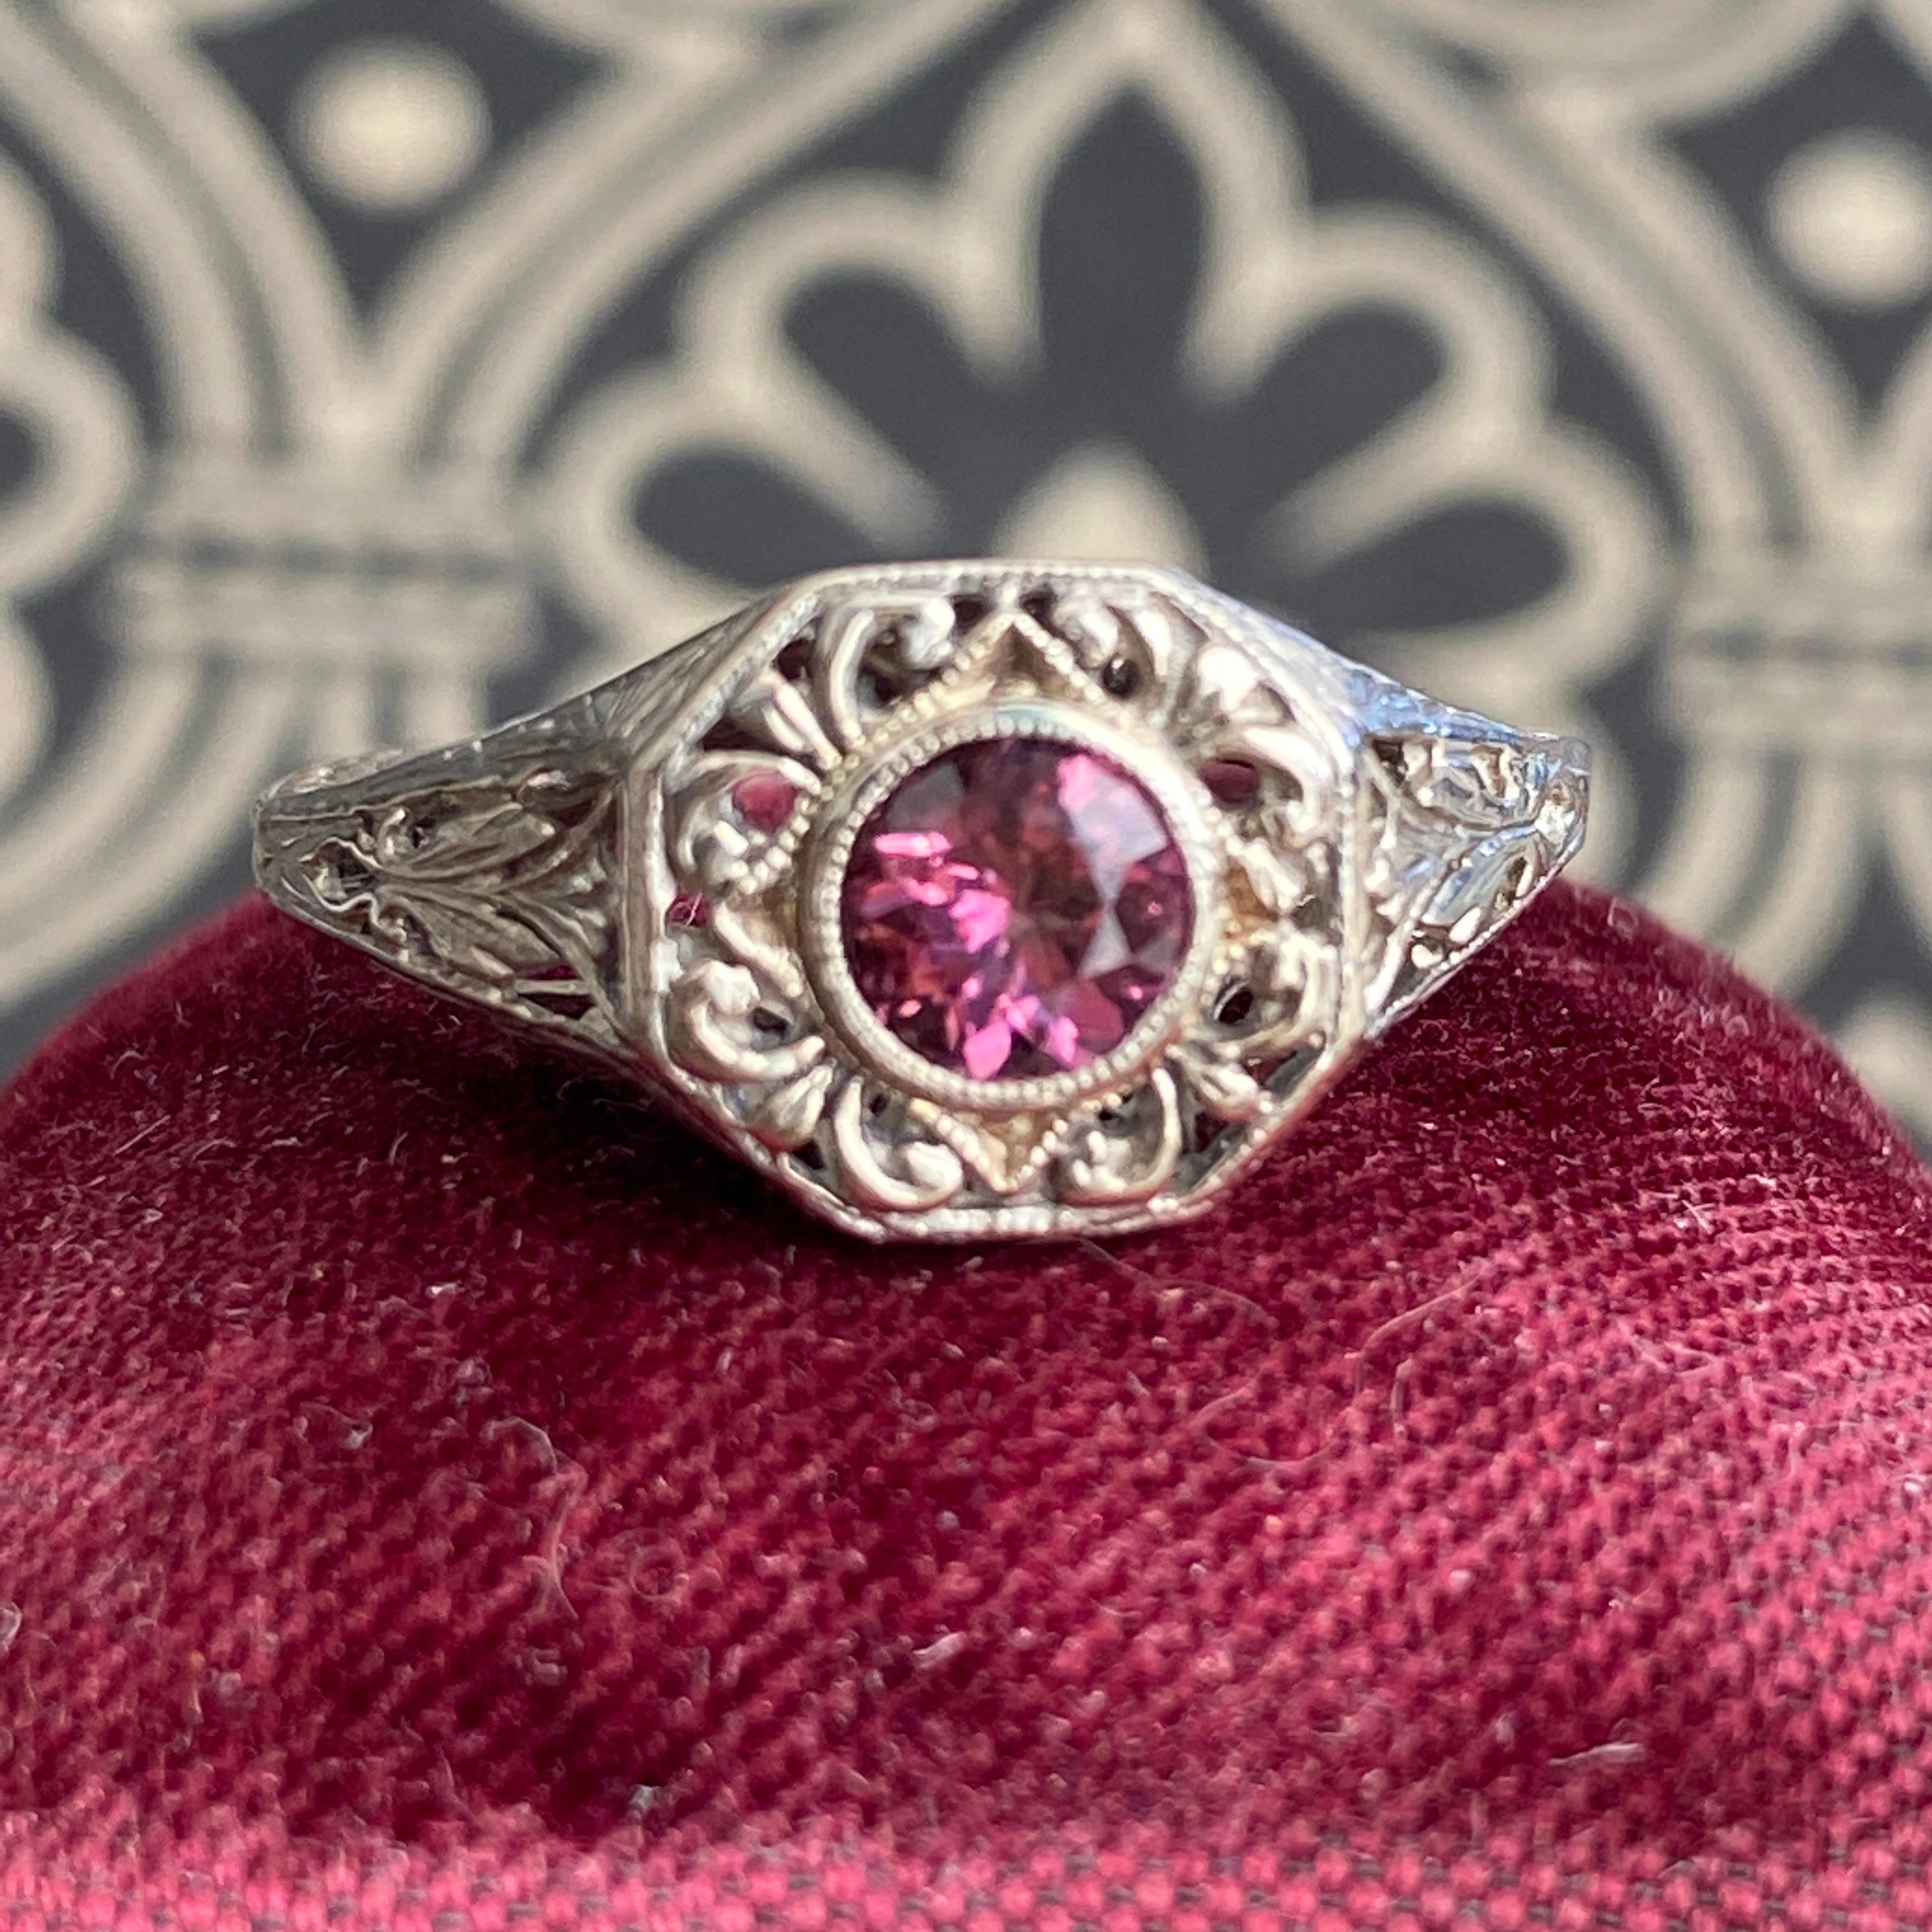 Details:
Stunning Art Deco Period Tourmaline and 14K white gold ring—would make a lovely engagement ring! The center stone is estimated .30 carats, and measures 4.6mm round. The filigree is beautiful on this ring, and is in lovely shape. This is a